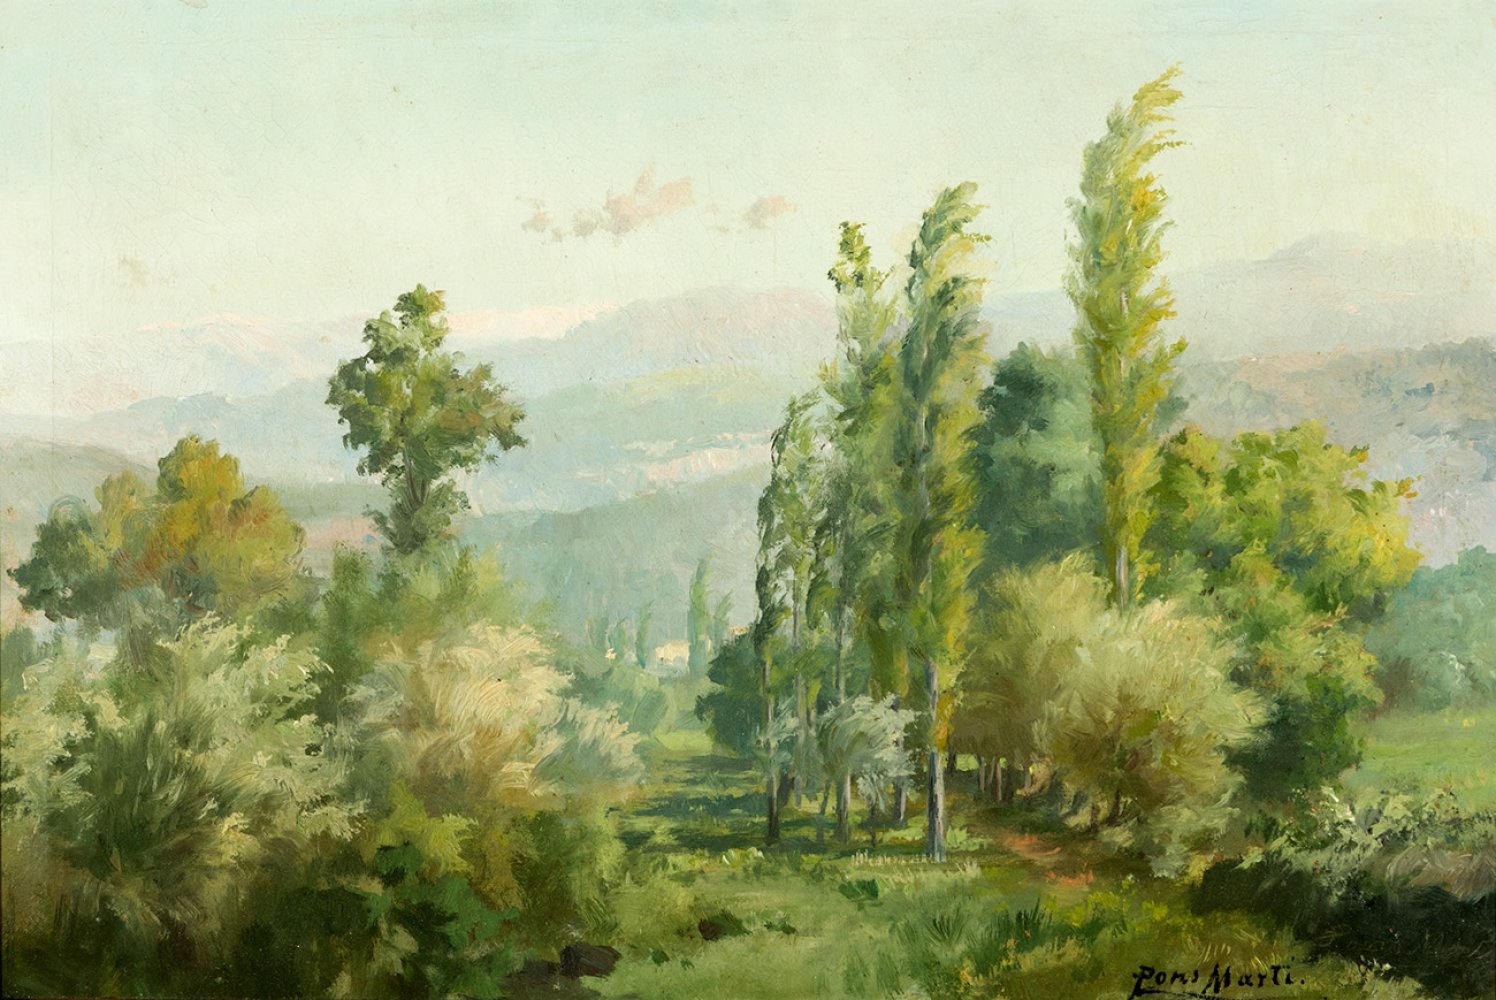 JAUME PONS MARTÍ (Barcelona, 1855 - Girona, 1931)."Landscape.Oil on canvas.Signed in the lower right